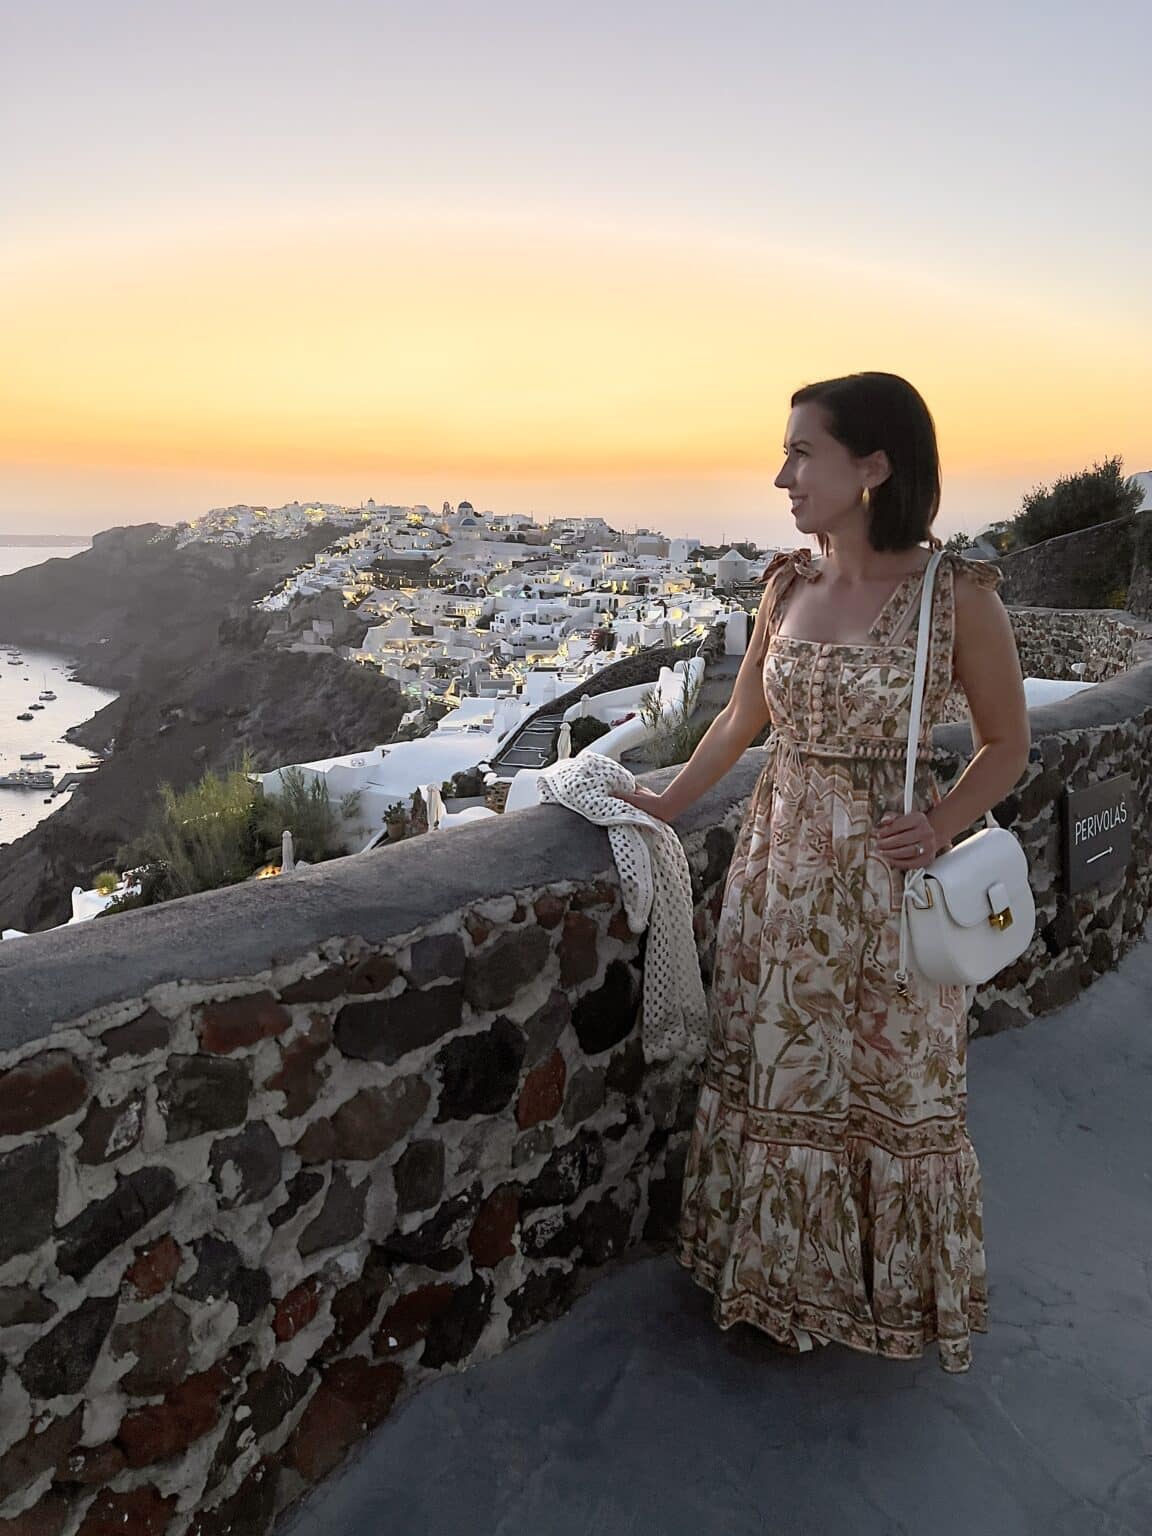 Lindsey of Have clothes, will travel wearing a floral Zimmermann dress with white Bottega Veneta bag looking at the sunset view of Santorini